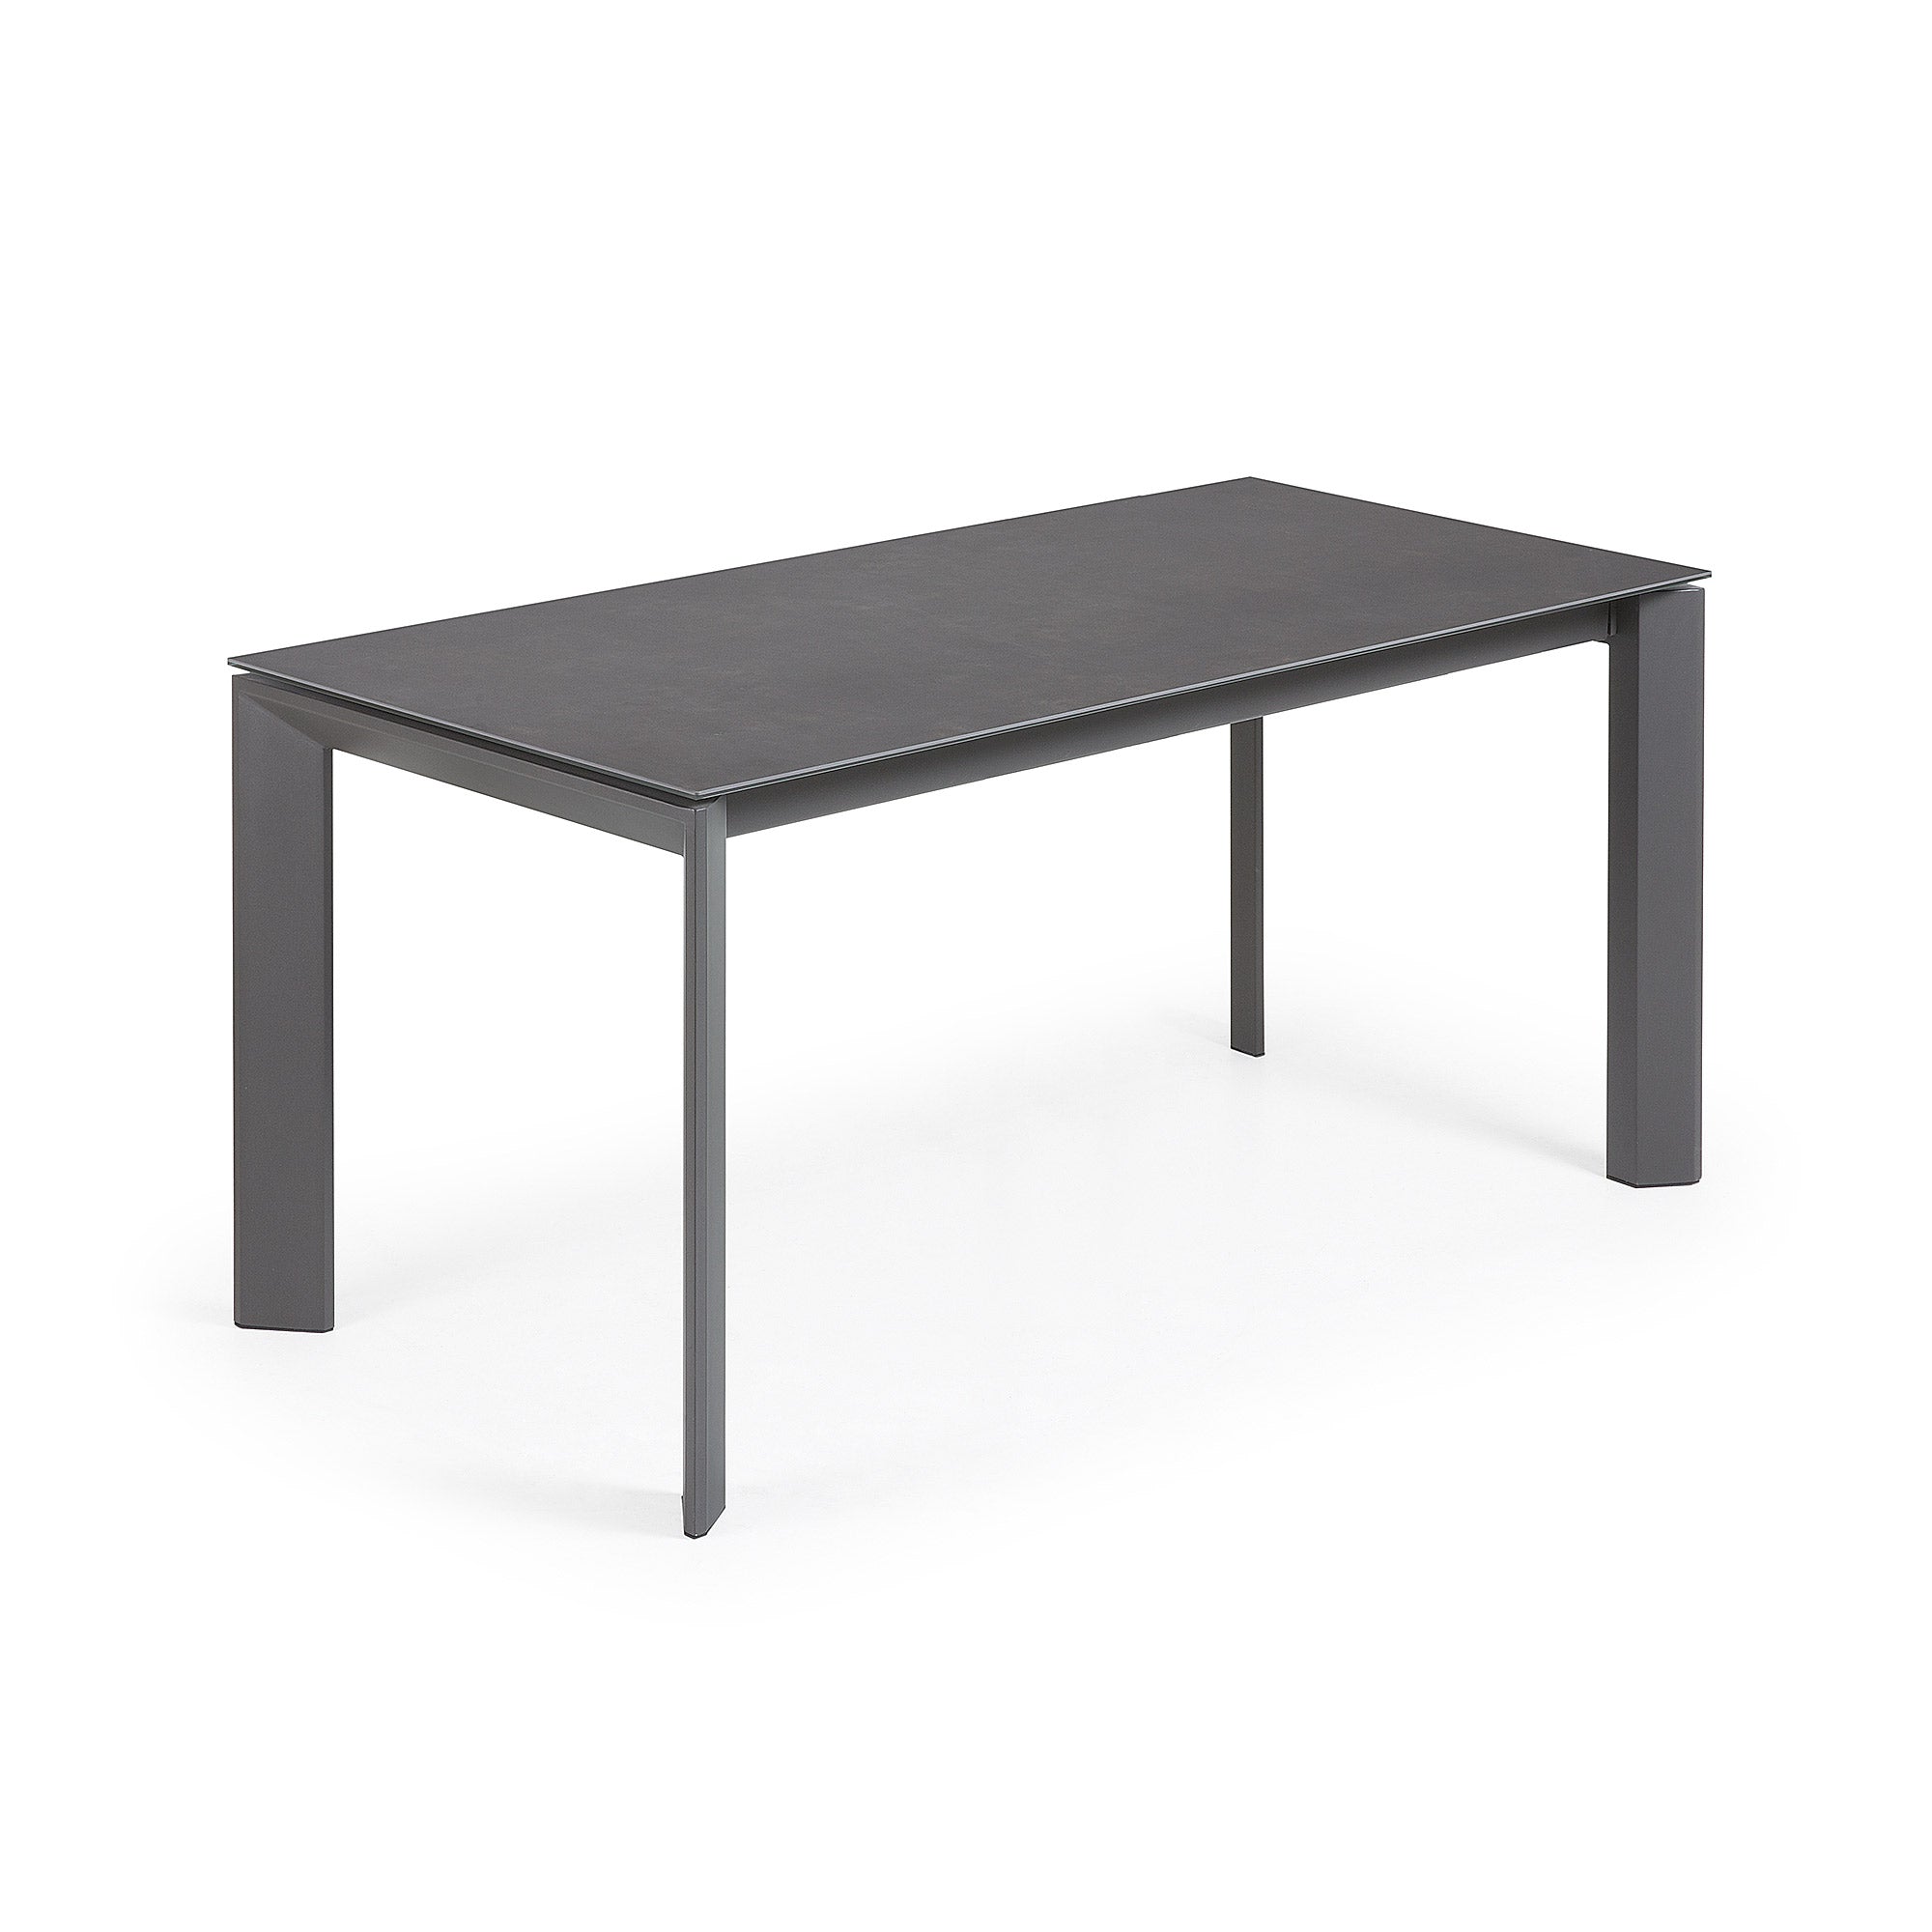 Axis extendable porcelain table with Volcano Rock finish and dark grey legs, 160 (220) cm